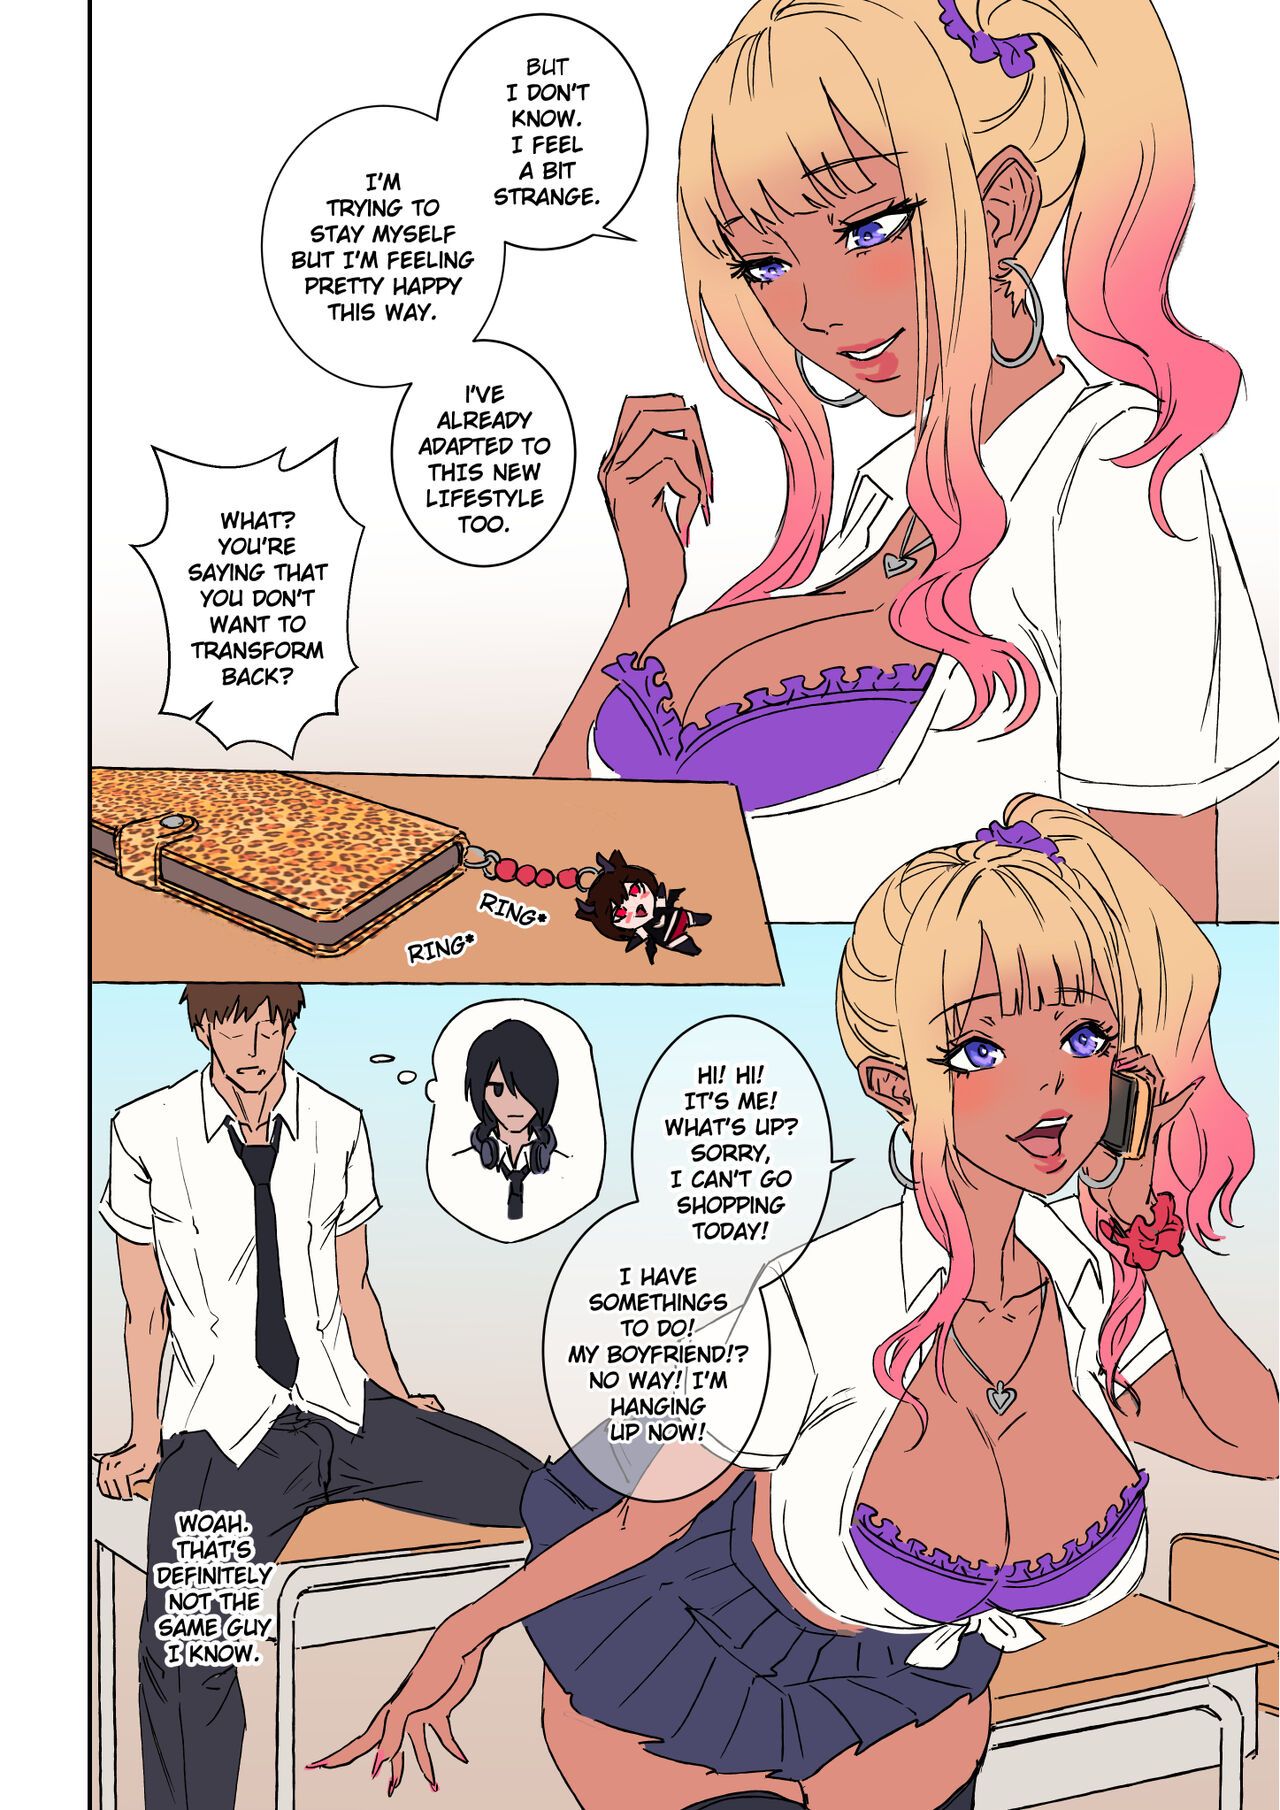 My Shy Best Friend Turned Into a Gal Girl Porn Comic english 11 - Porn Comic